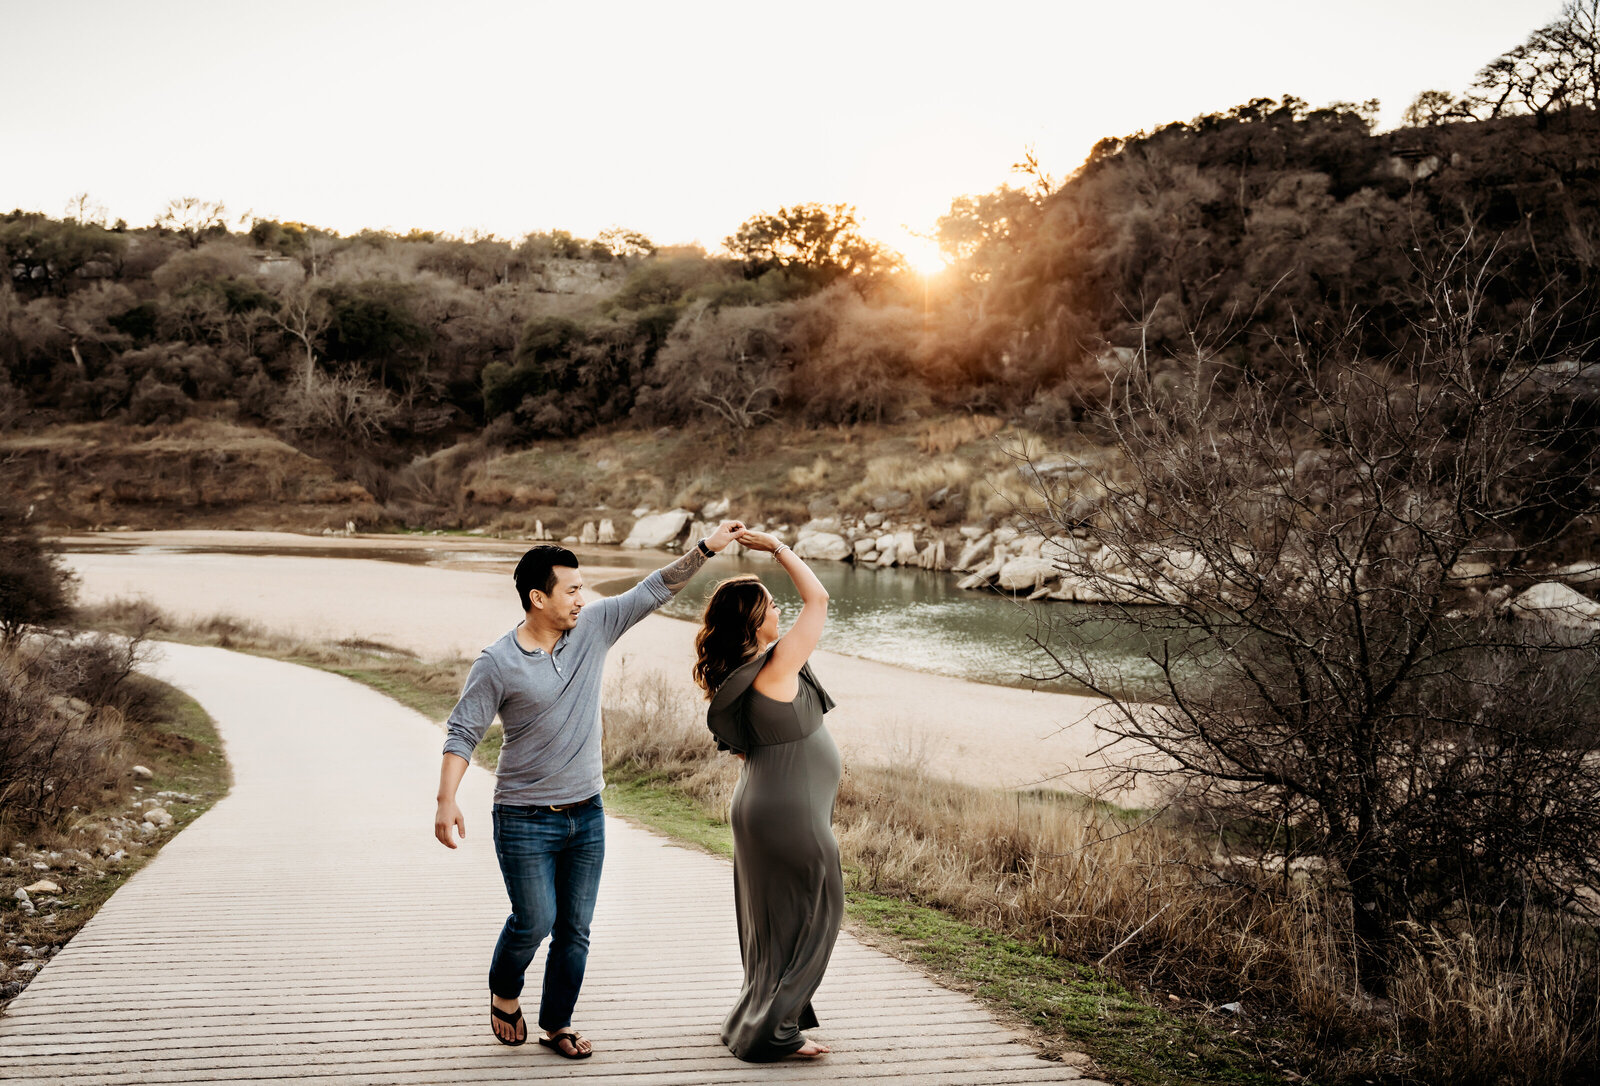 Maternity Photographer, a man dances with his pregnant wife on a paved trail near the lake